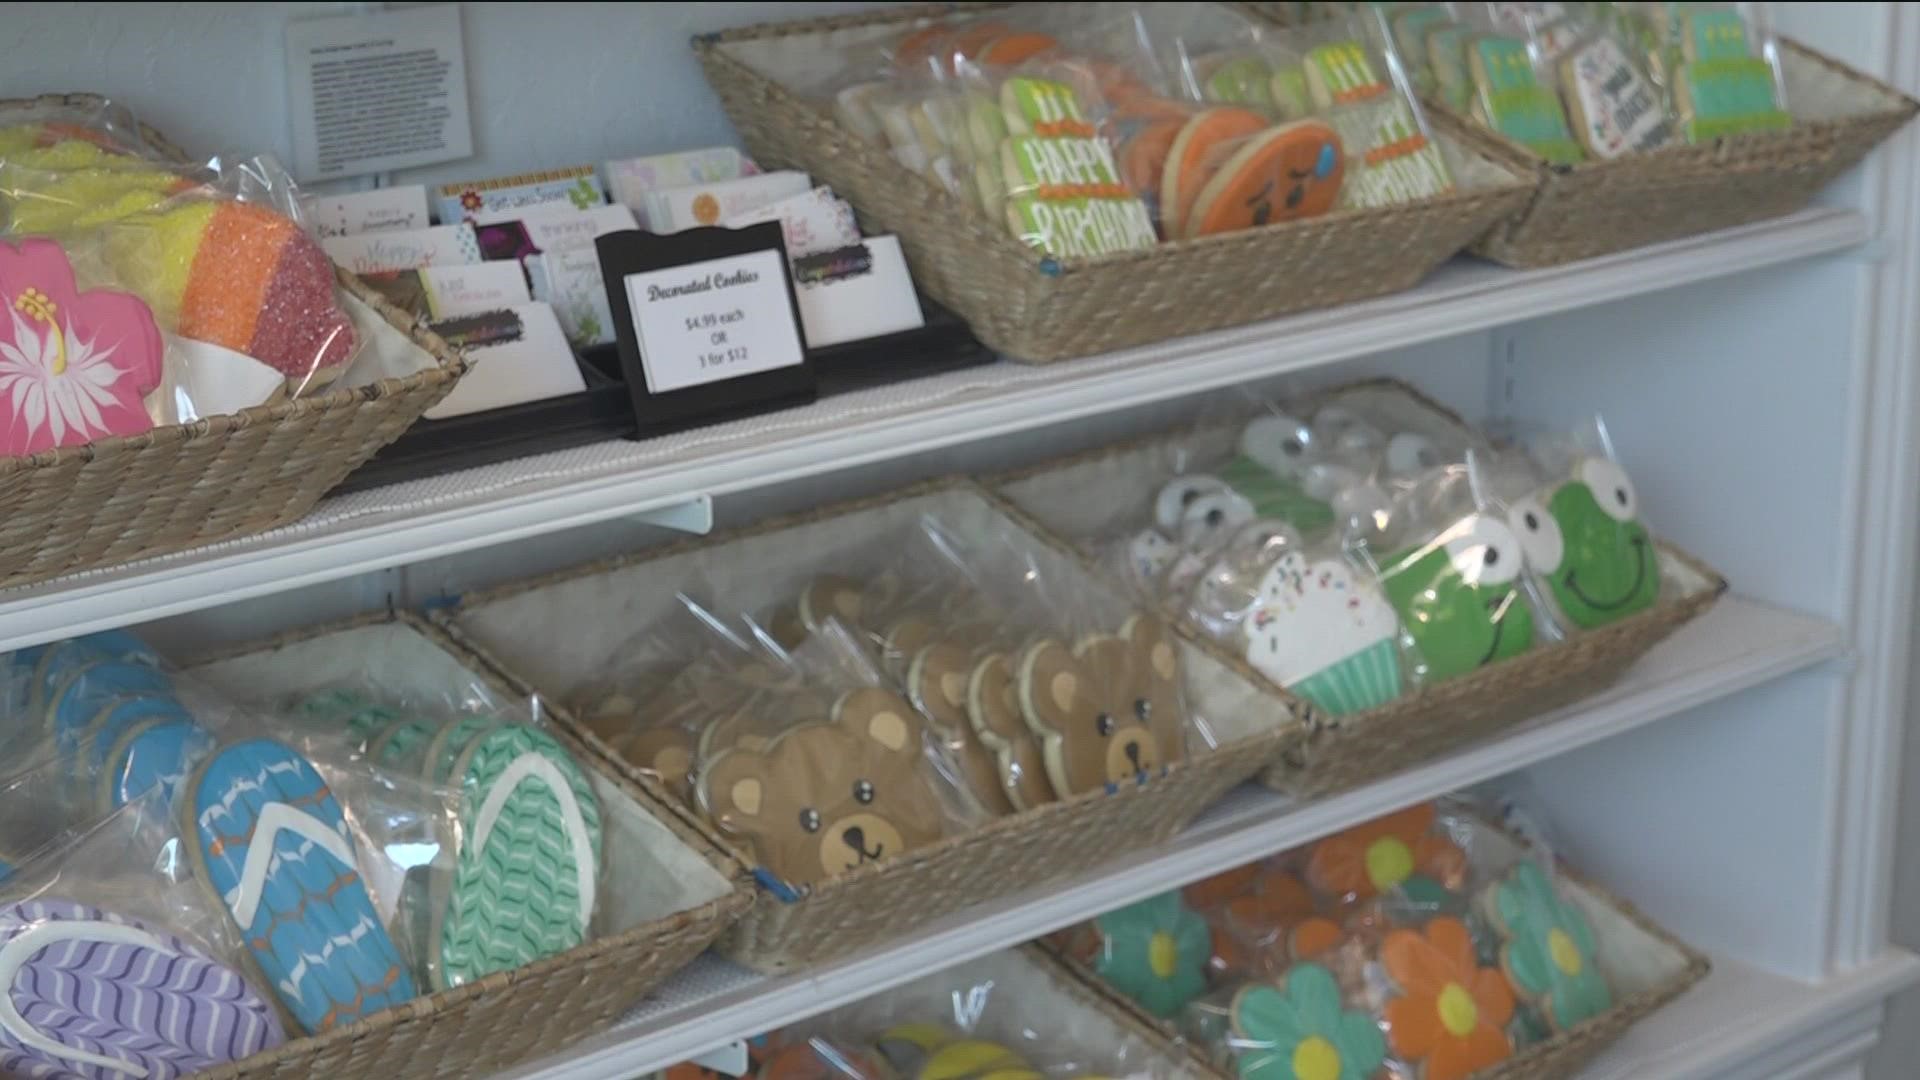 Edible Art Specialty Cakes and Cookies is combating labor and goods costs, but says the community support is the sweetest treat of them all.